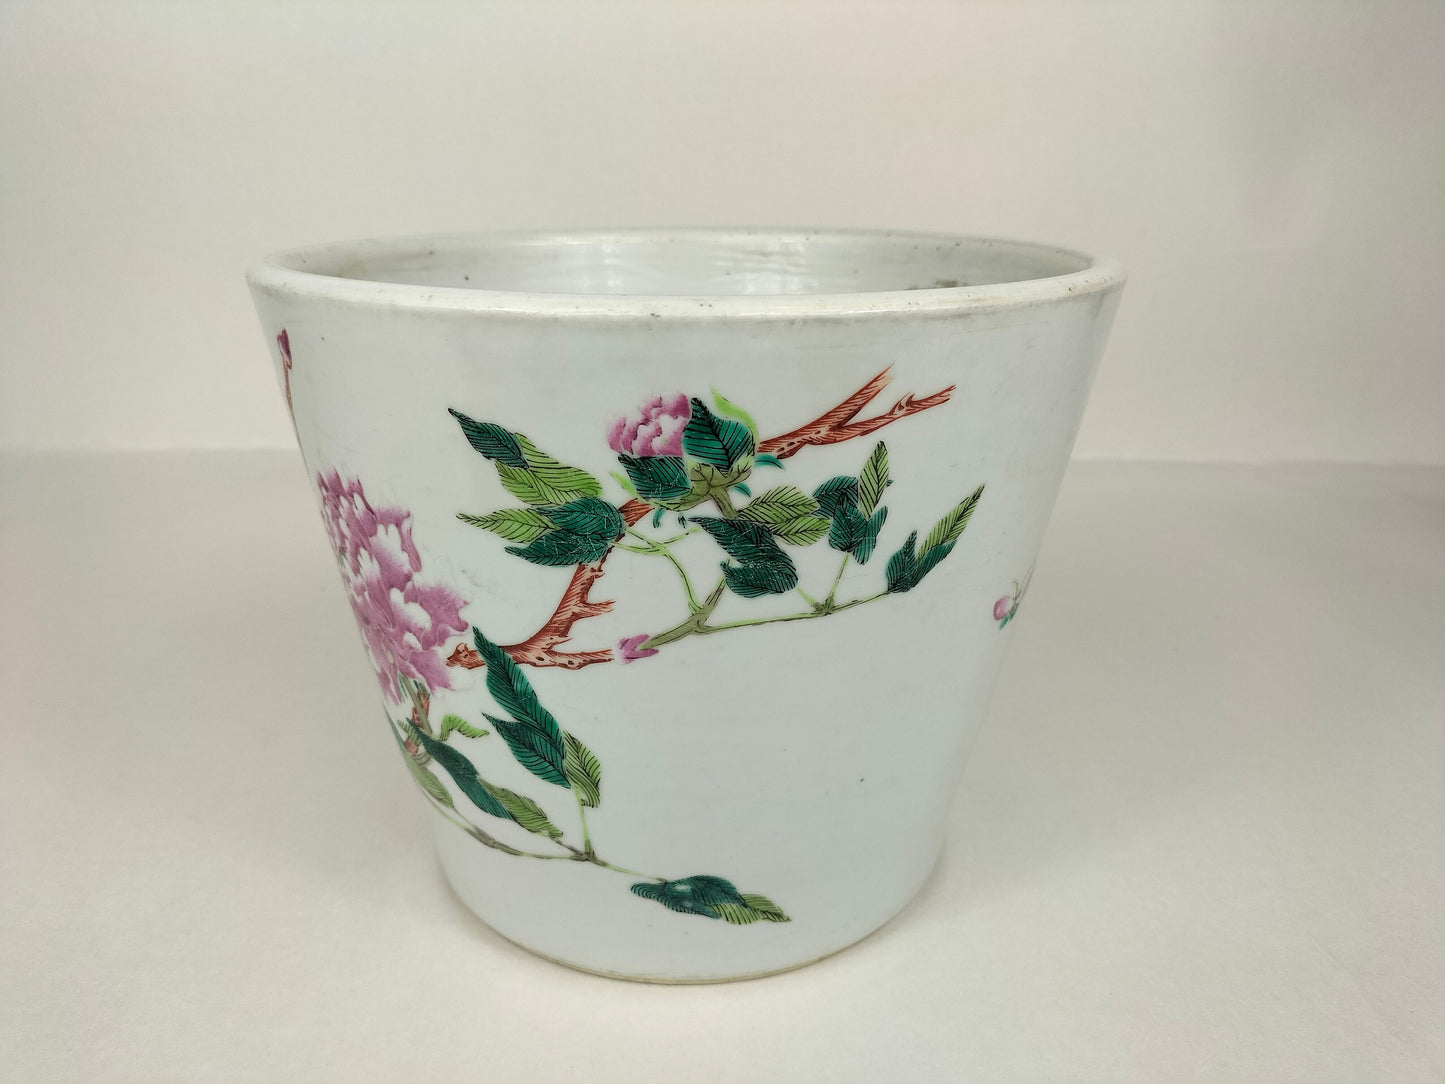 Antique Chinese famille rose planter decorated with flowers // Qing Dynasty - 19th century